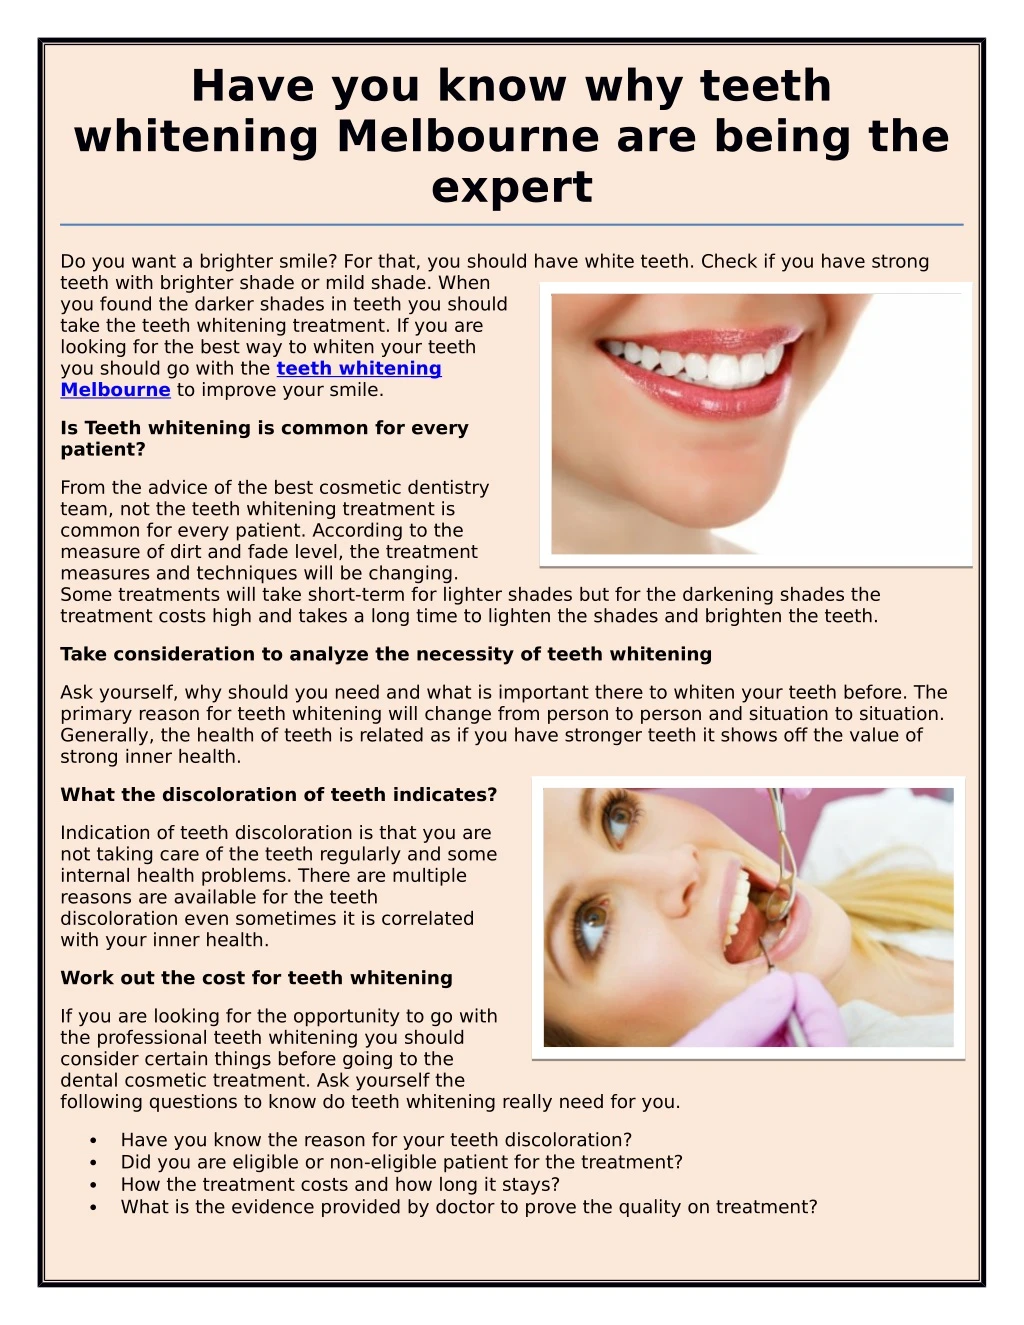 have you know why teeth whitening melbourne